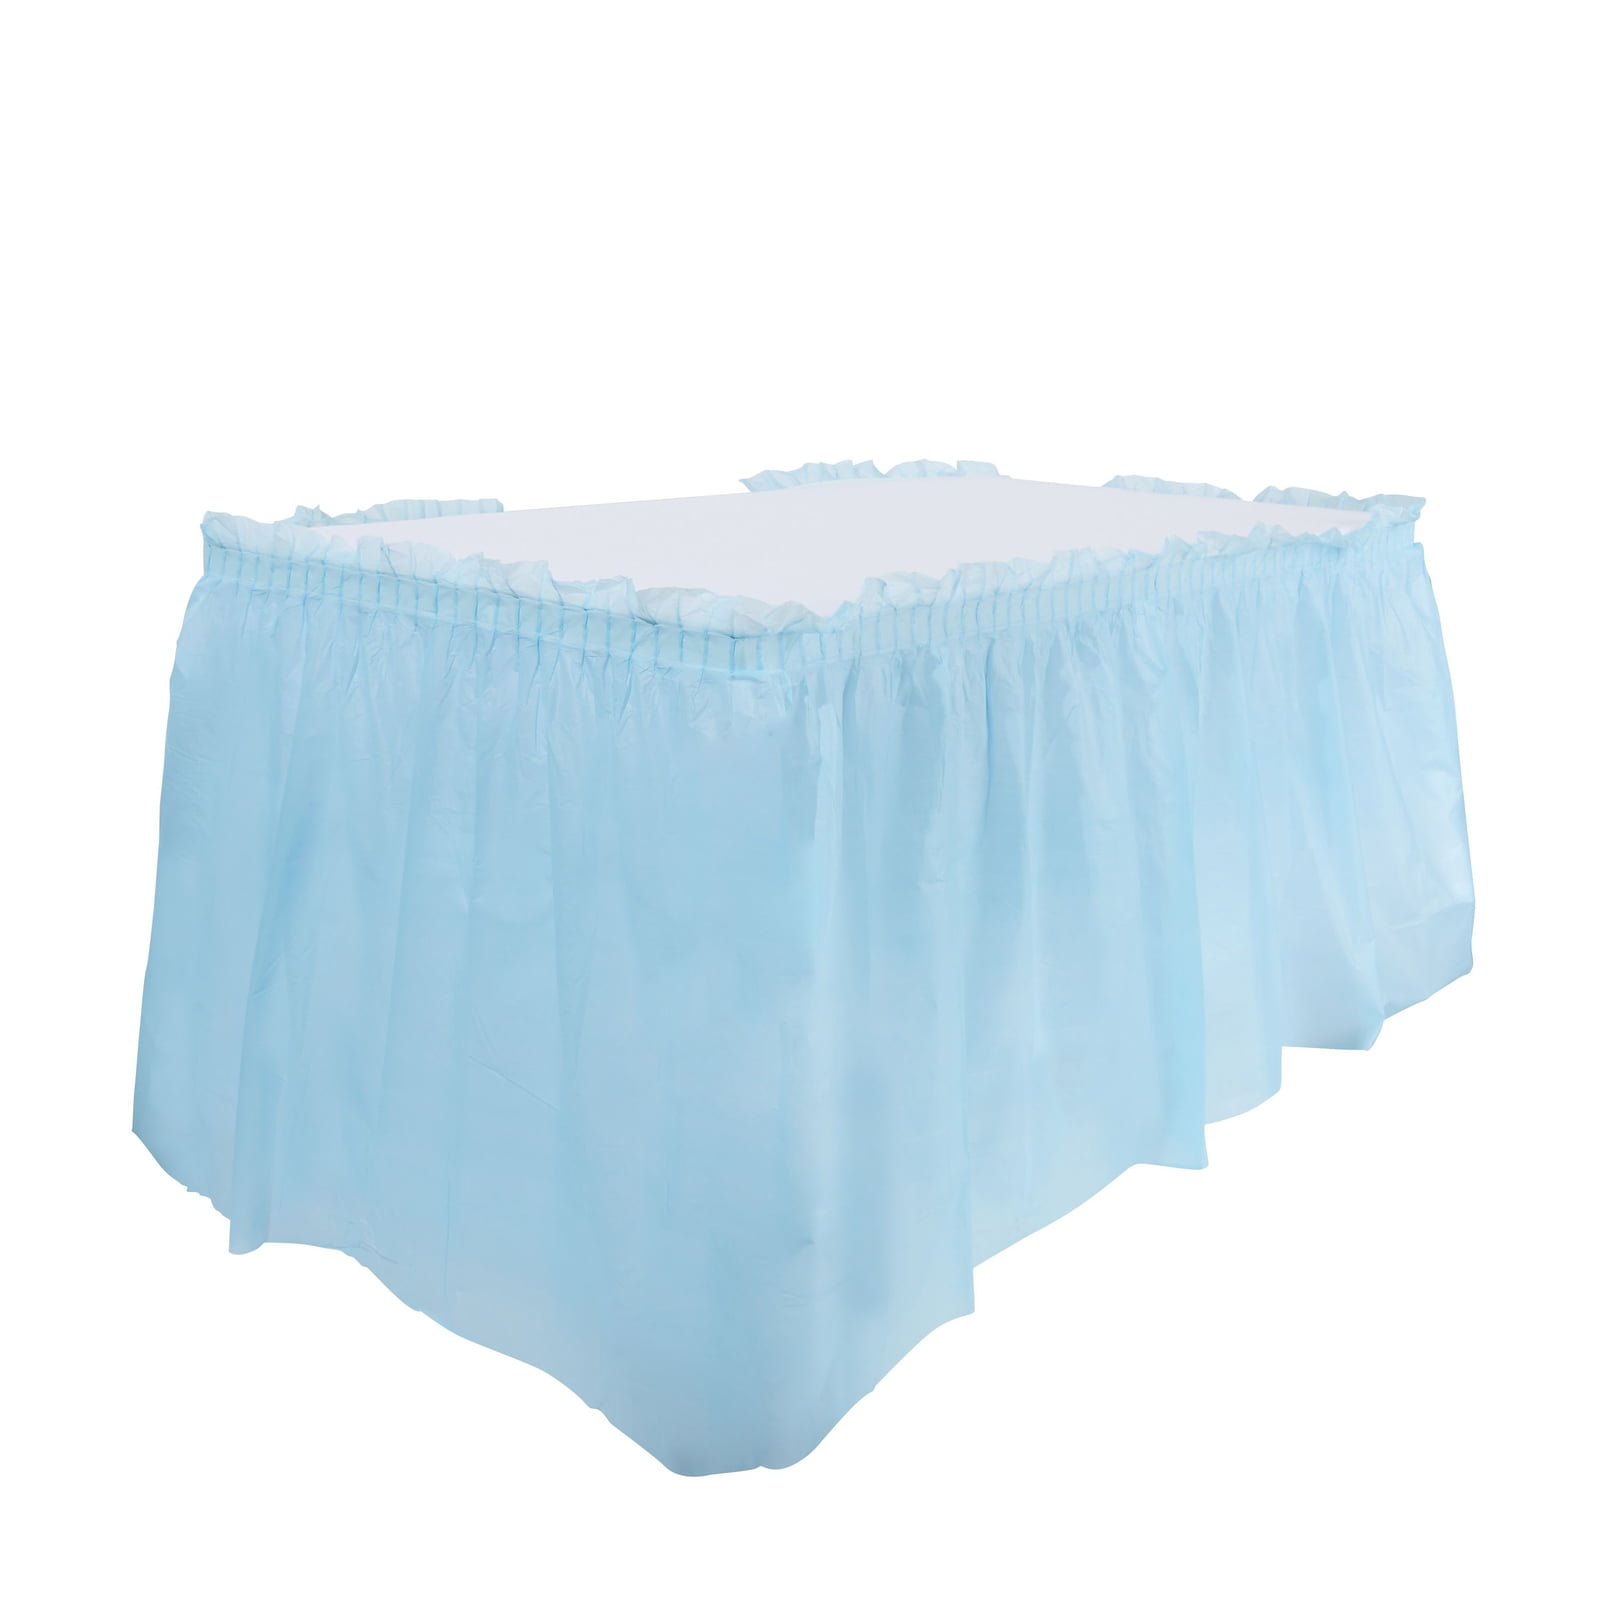 2 Plastic Table Skirts 13' X 29" Streches-19' Lavender